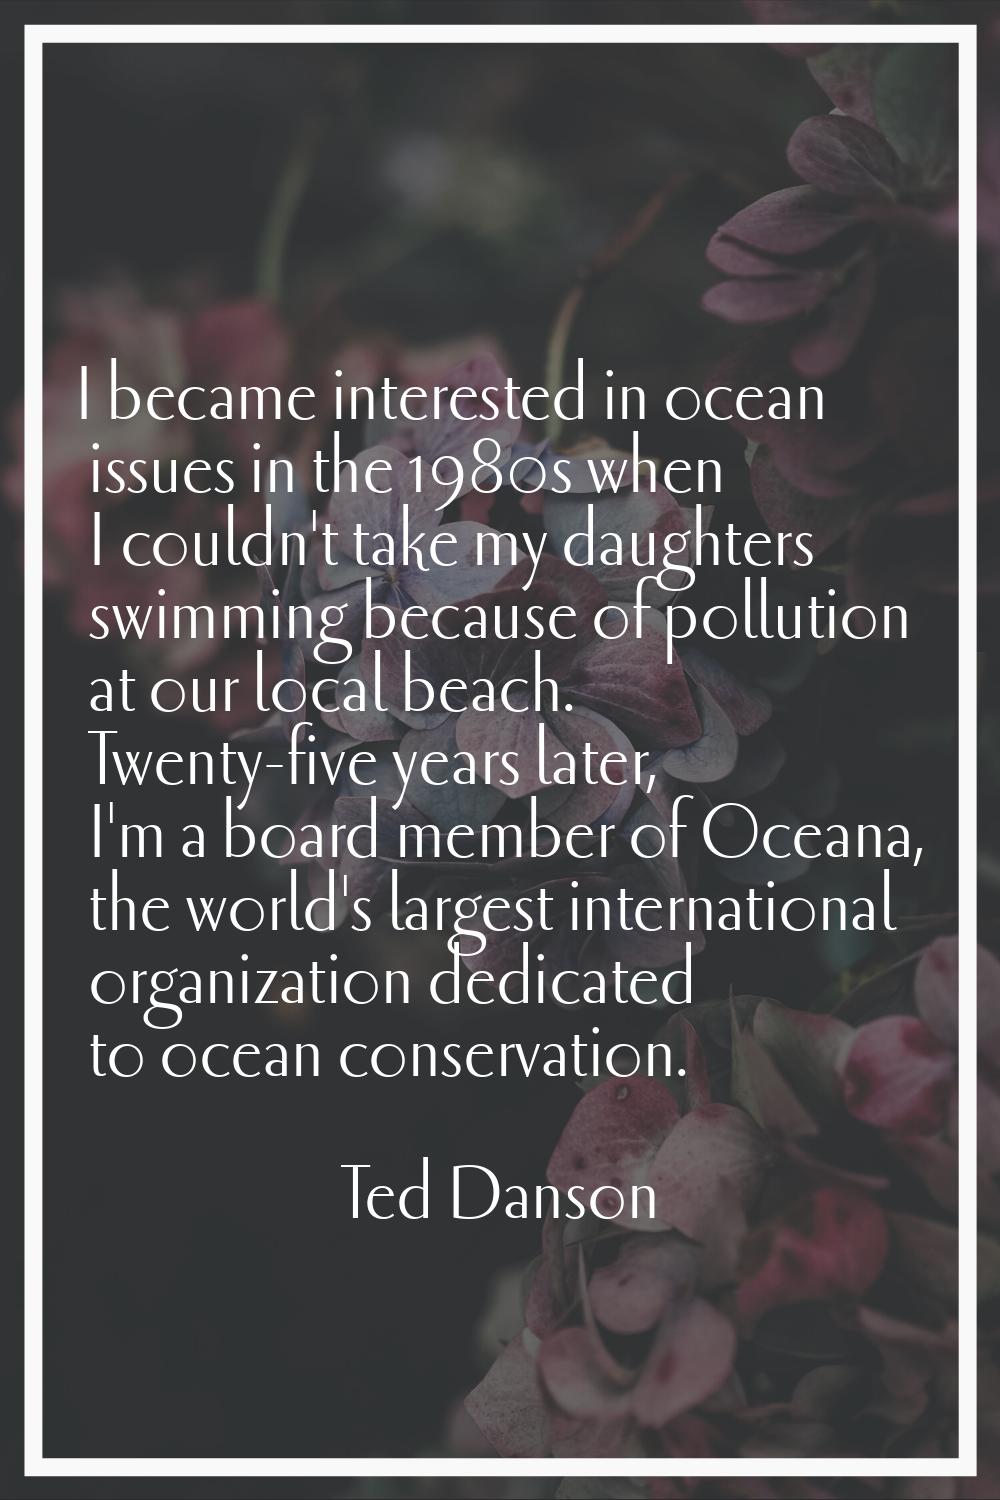 I became interested in ocean issues in the 1980s when I couldn't take my daughters swimming because